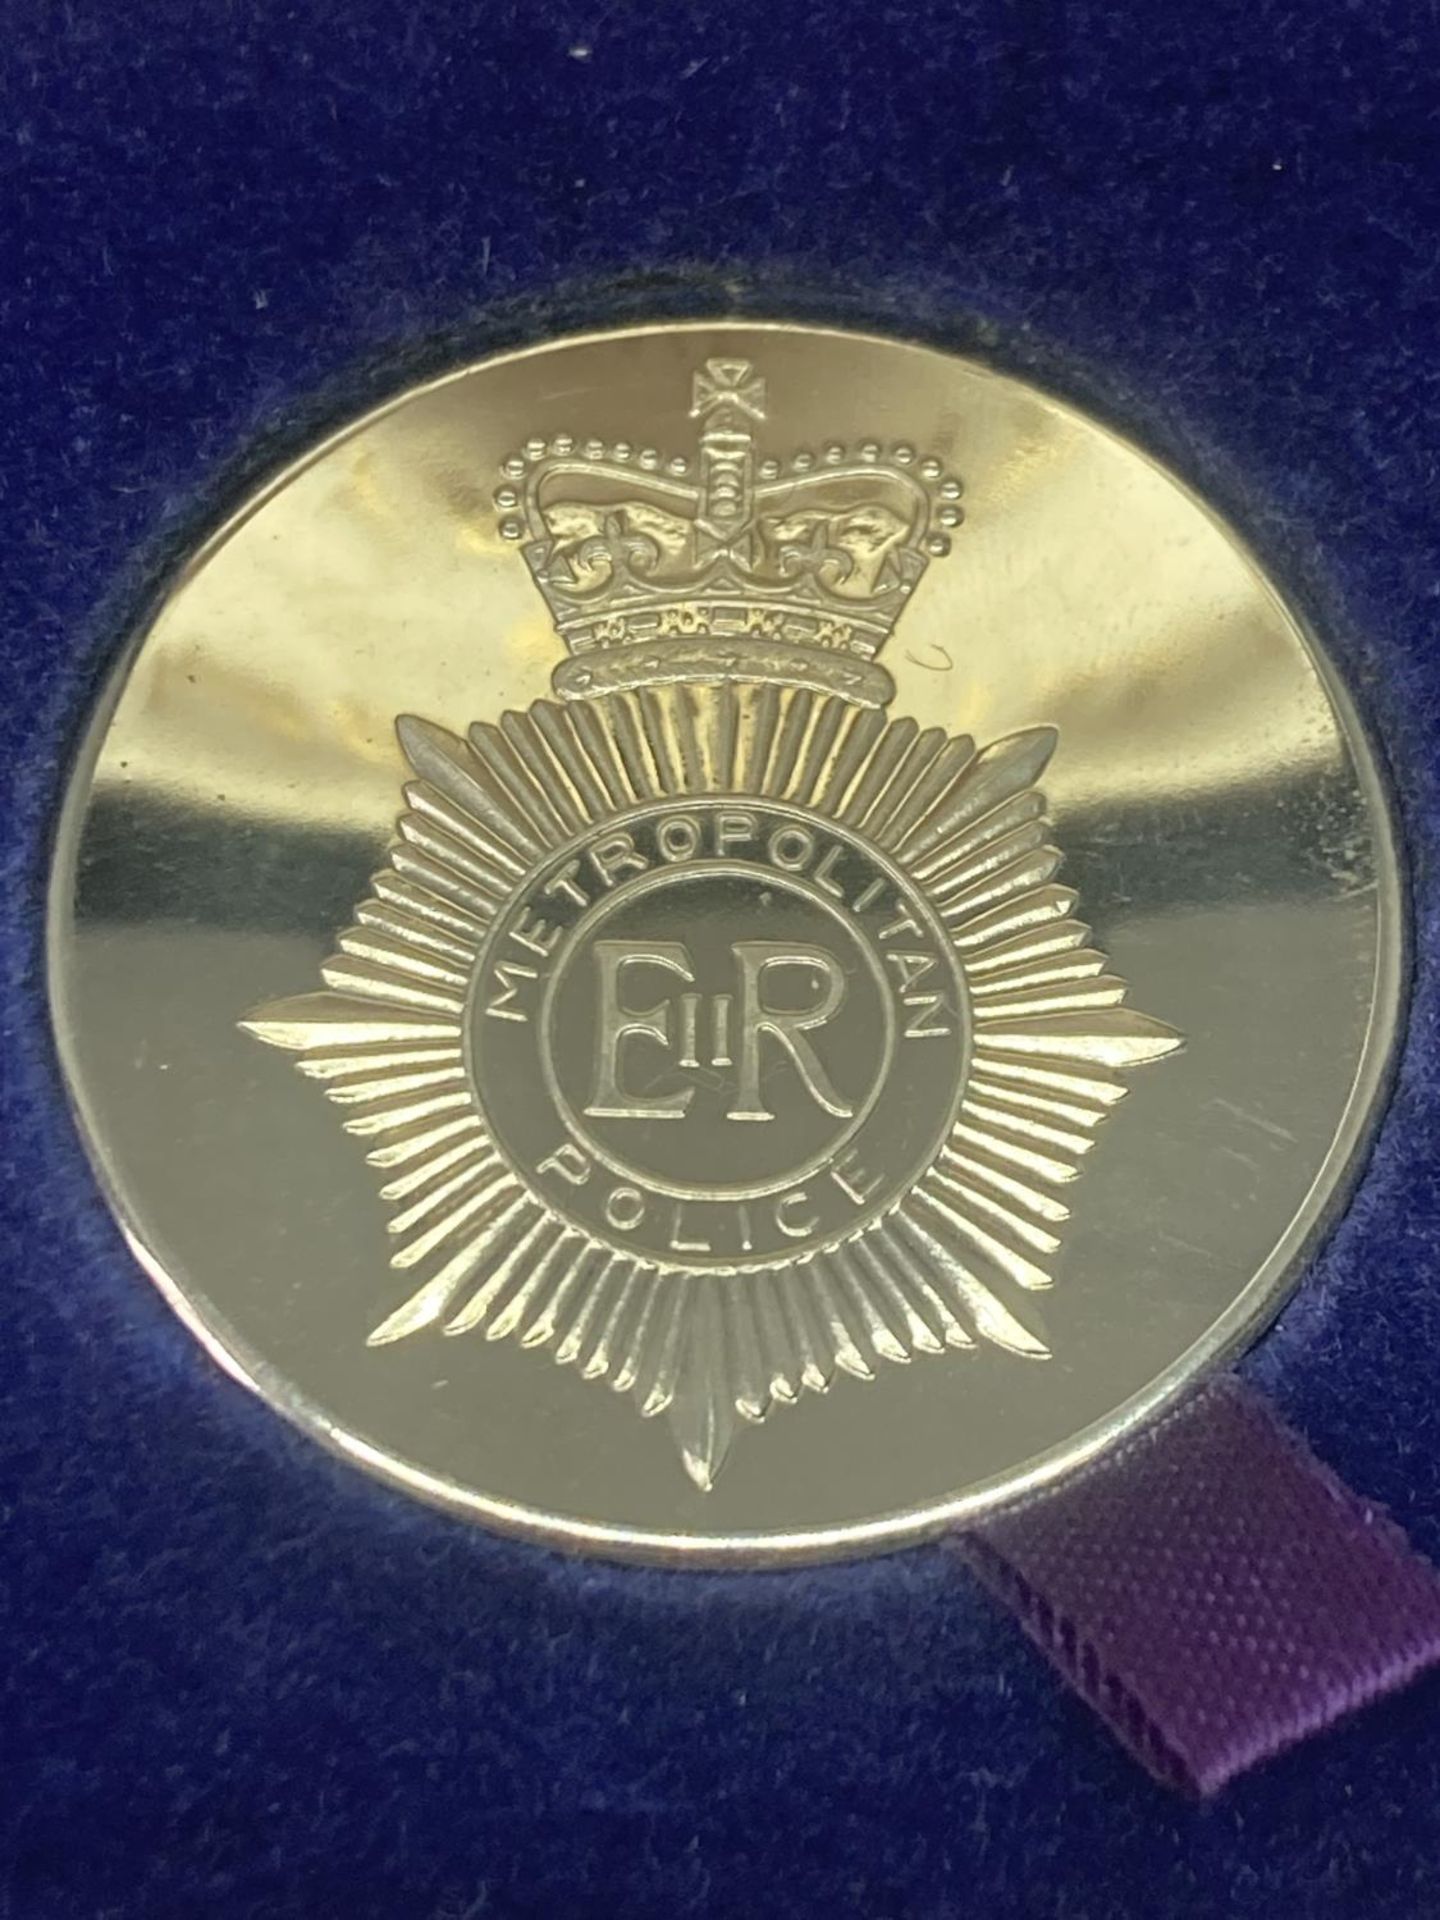 A SILVER TOWER MINT METROPOLITAN POLICE 150TH ANNIVERSARY MEDAL IN A PRESENTATION BOX - Image 3 of 8